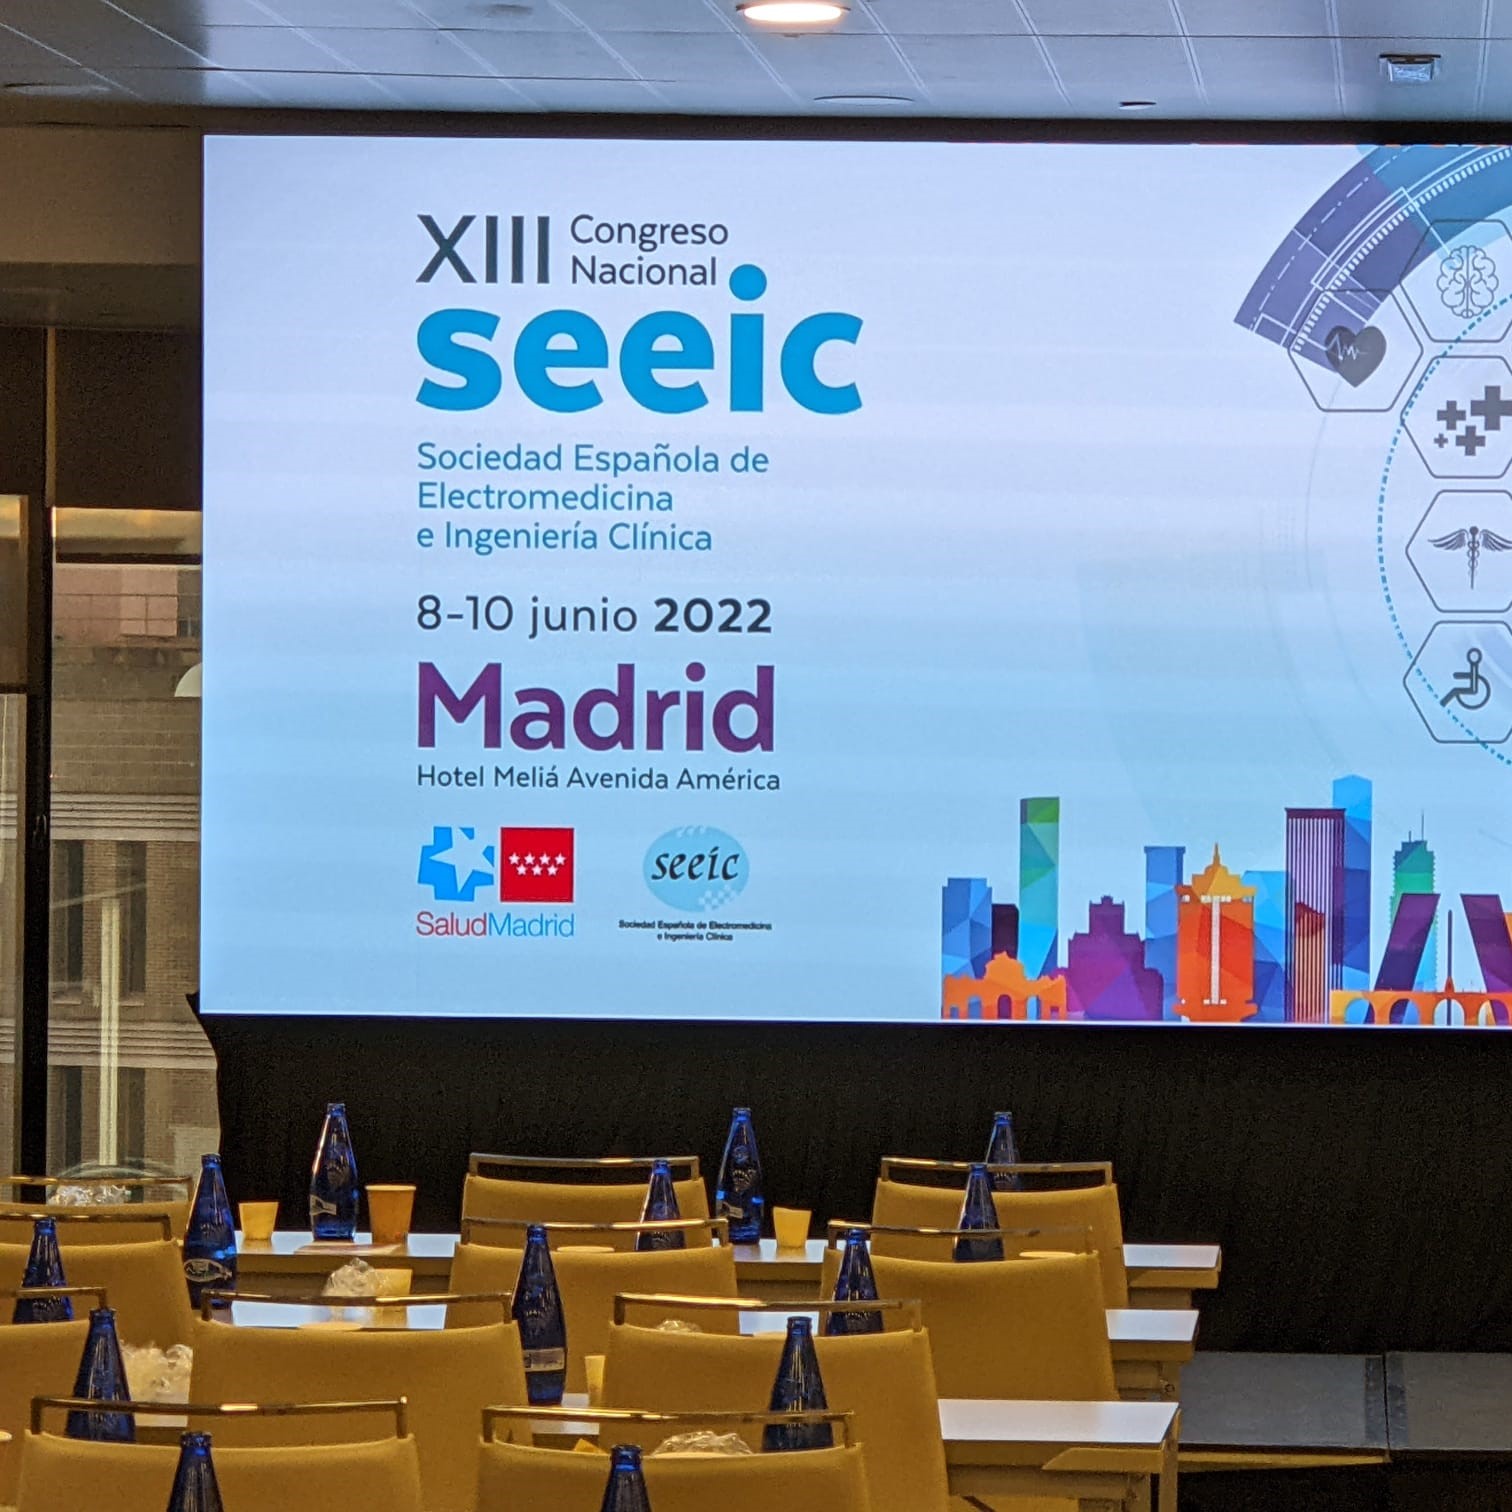 Maintenance, electromedicine and biomedical engineering are the protagonists of the SEEIC congress